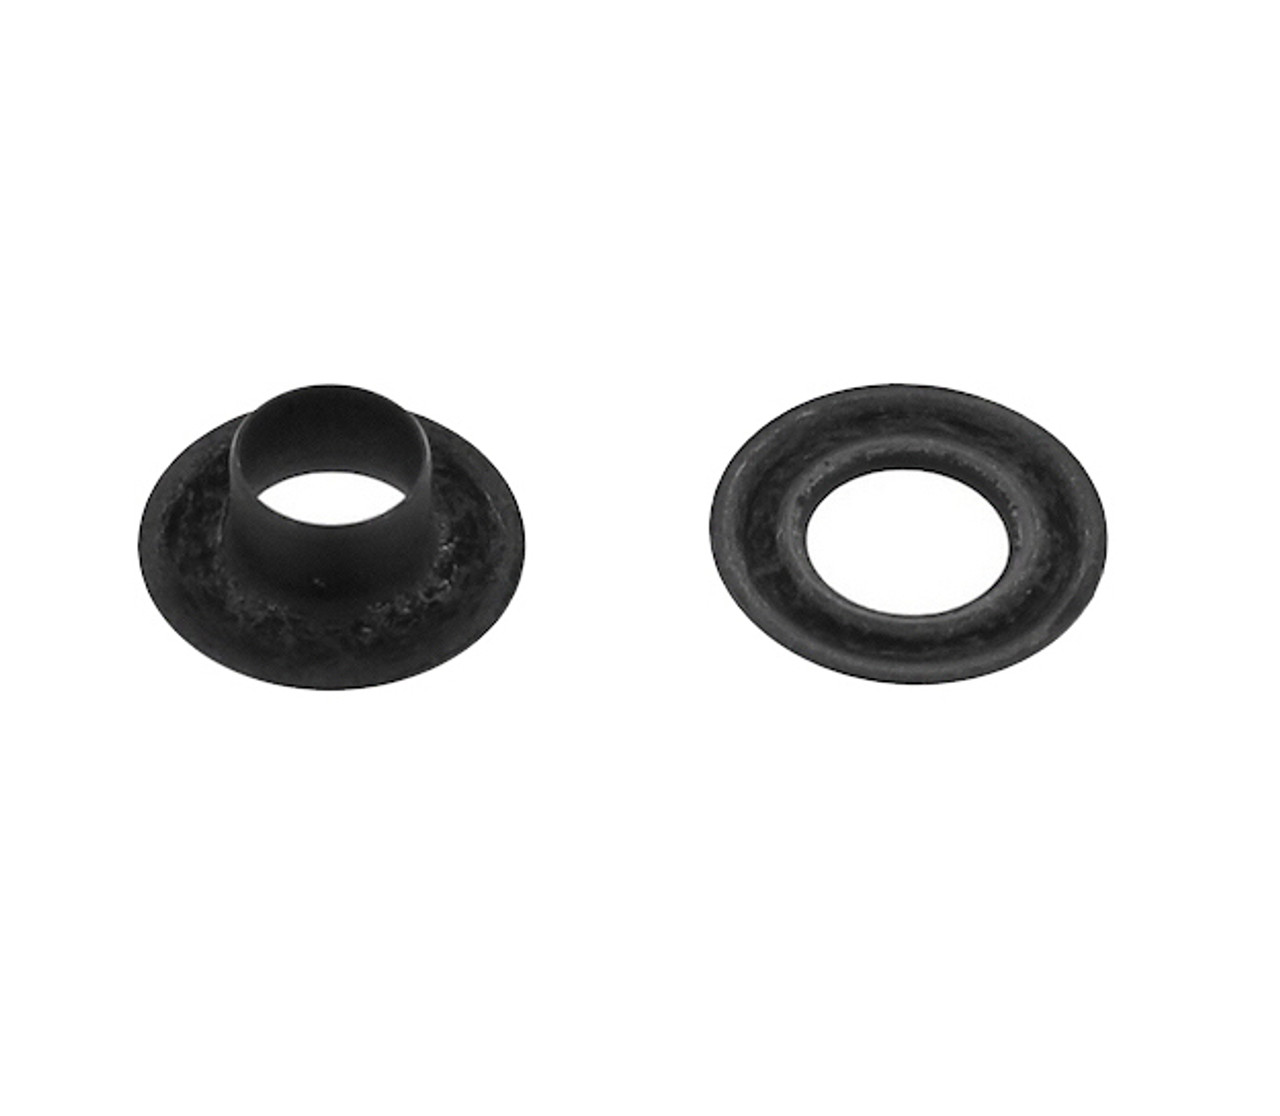 Generic Leather Grommet Kit, 100 Sets Metal Grommets Eyelets With